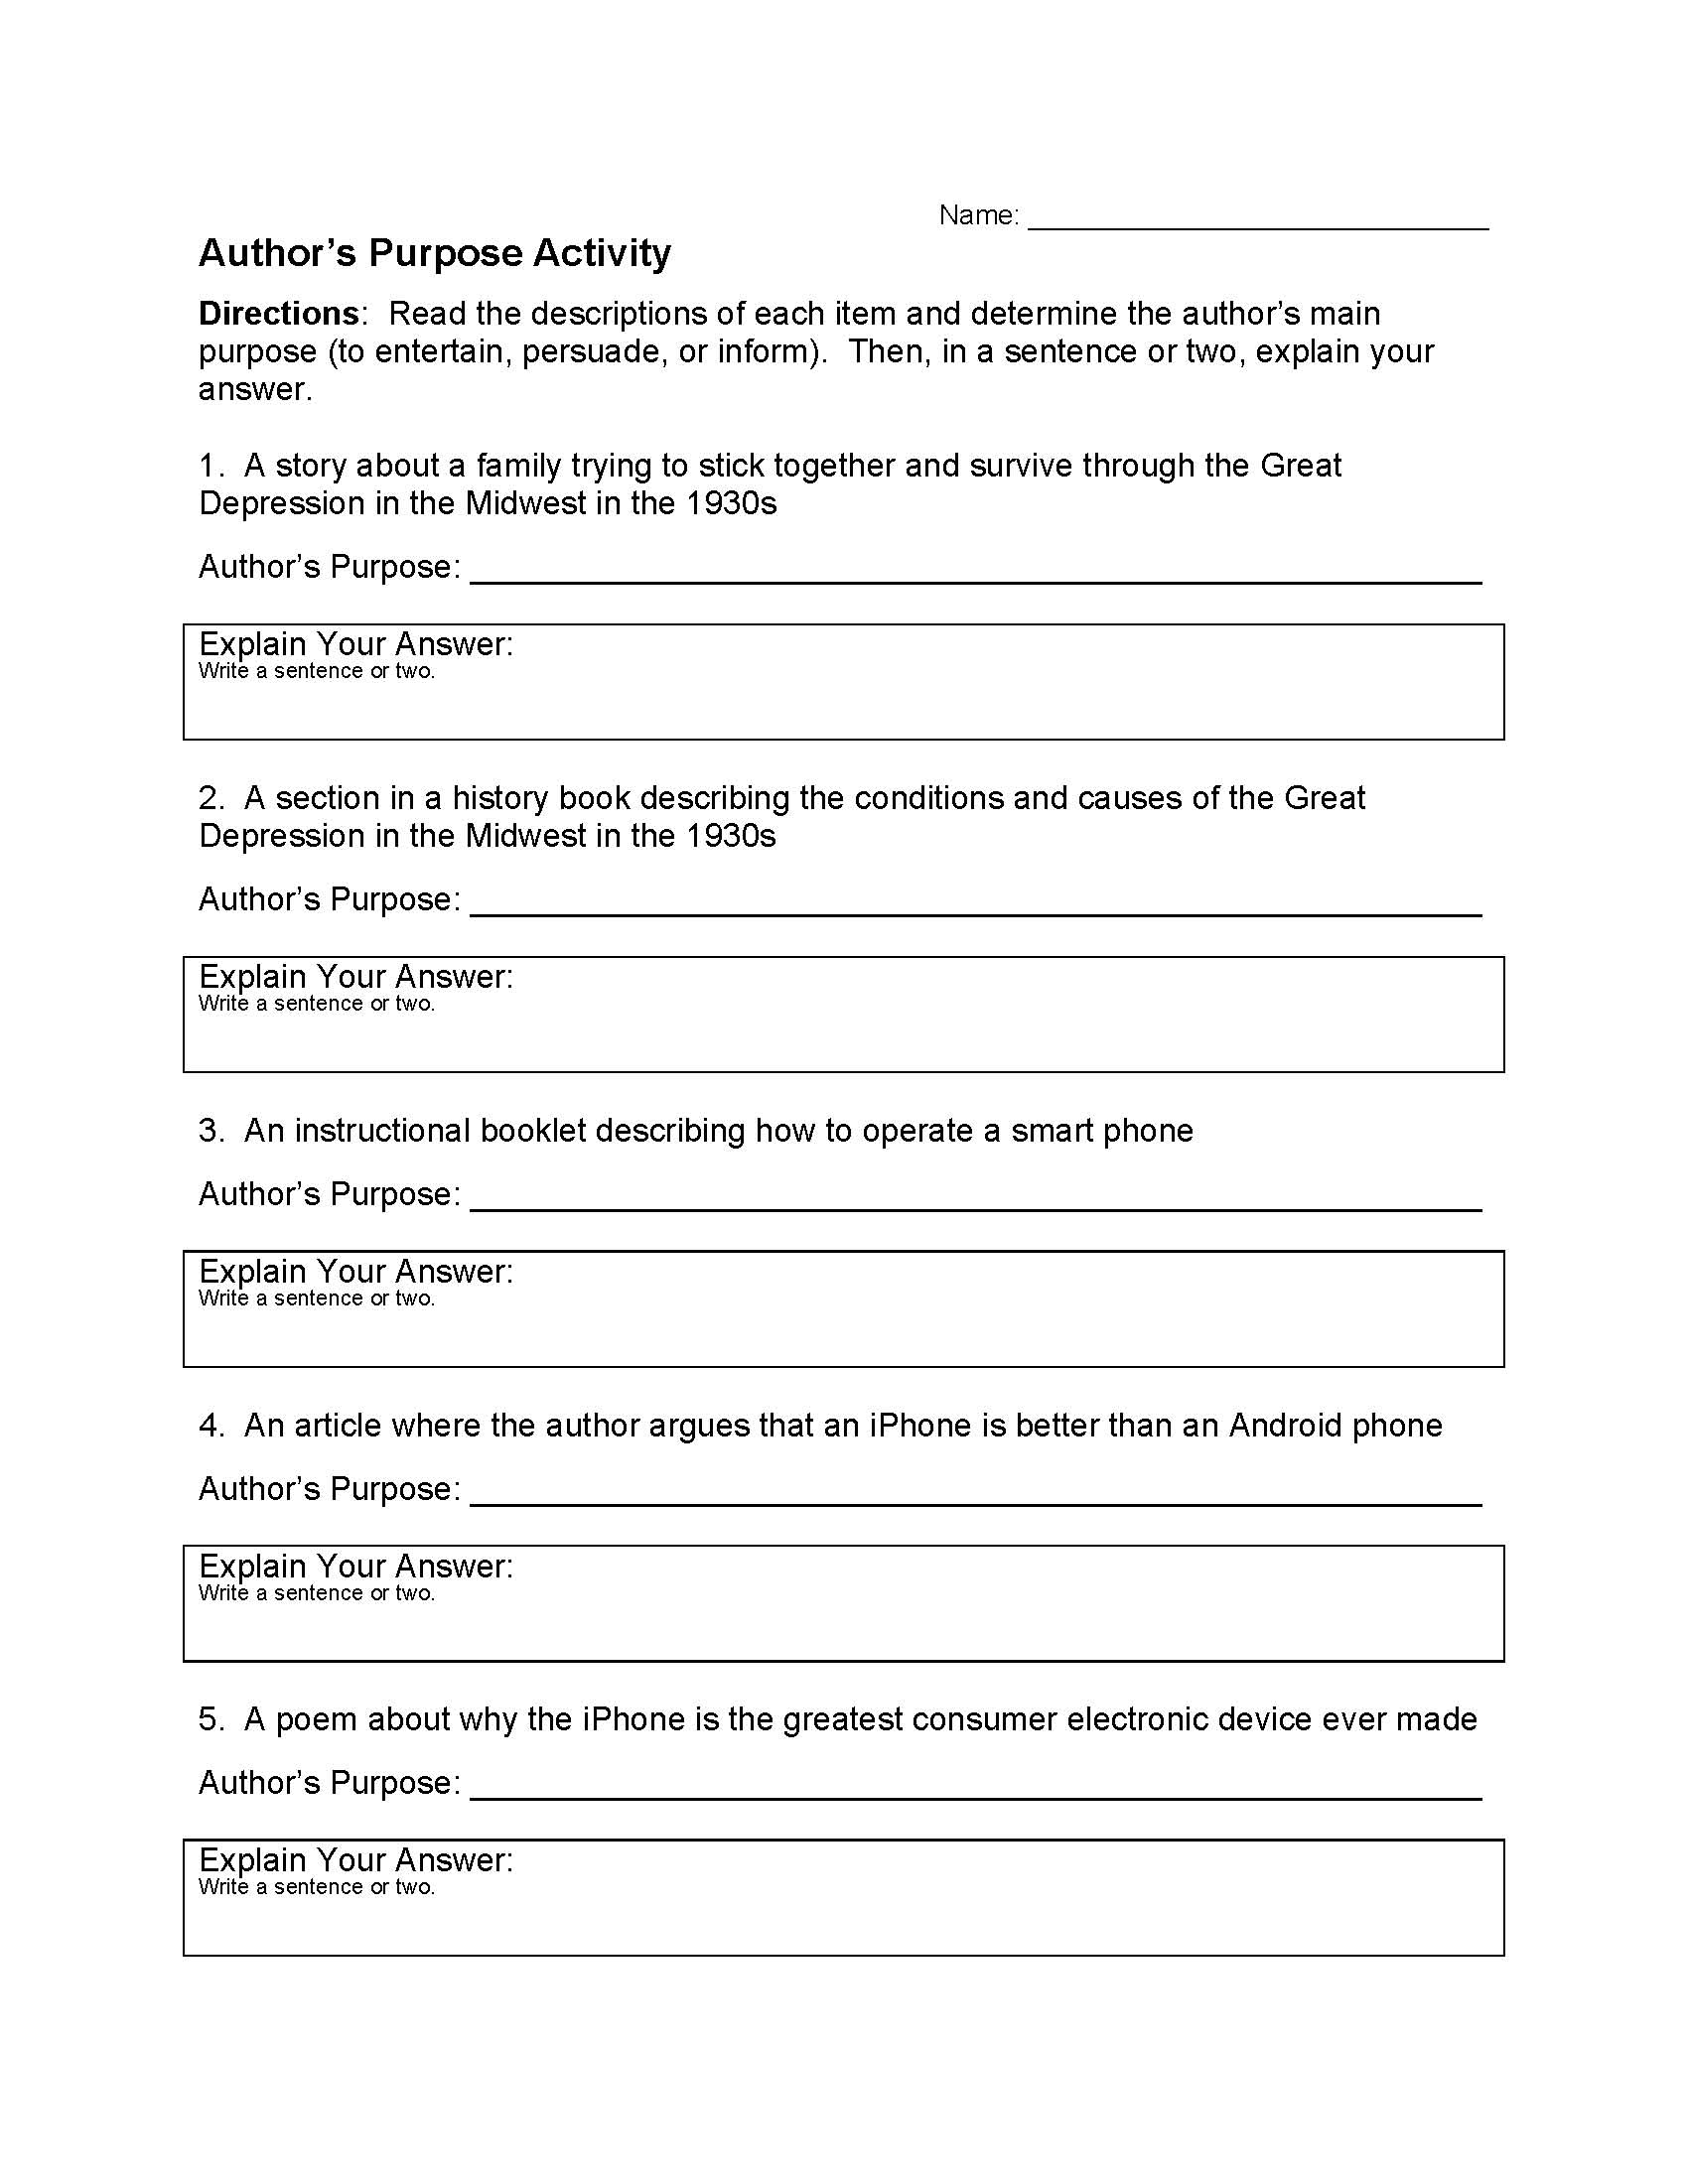 author-s-purpose-worksheet-1-preview